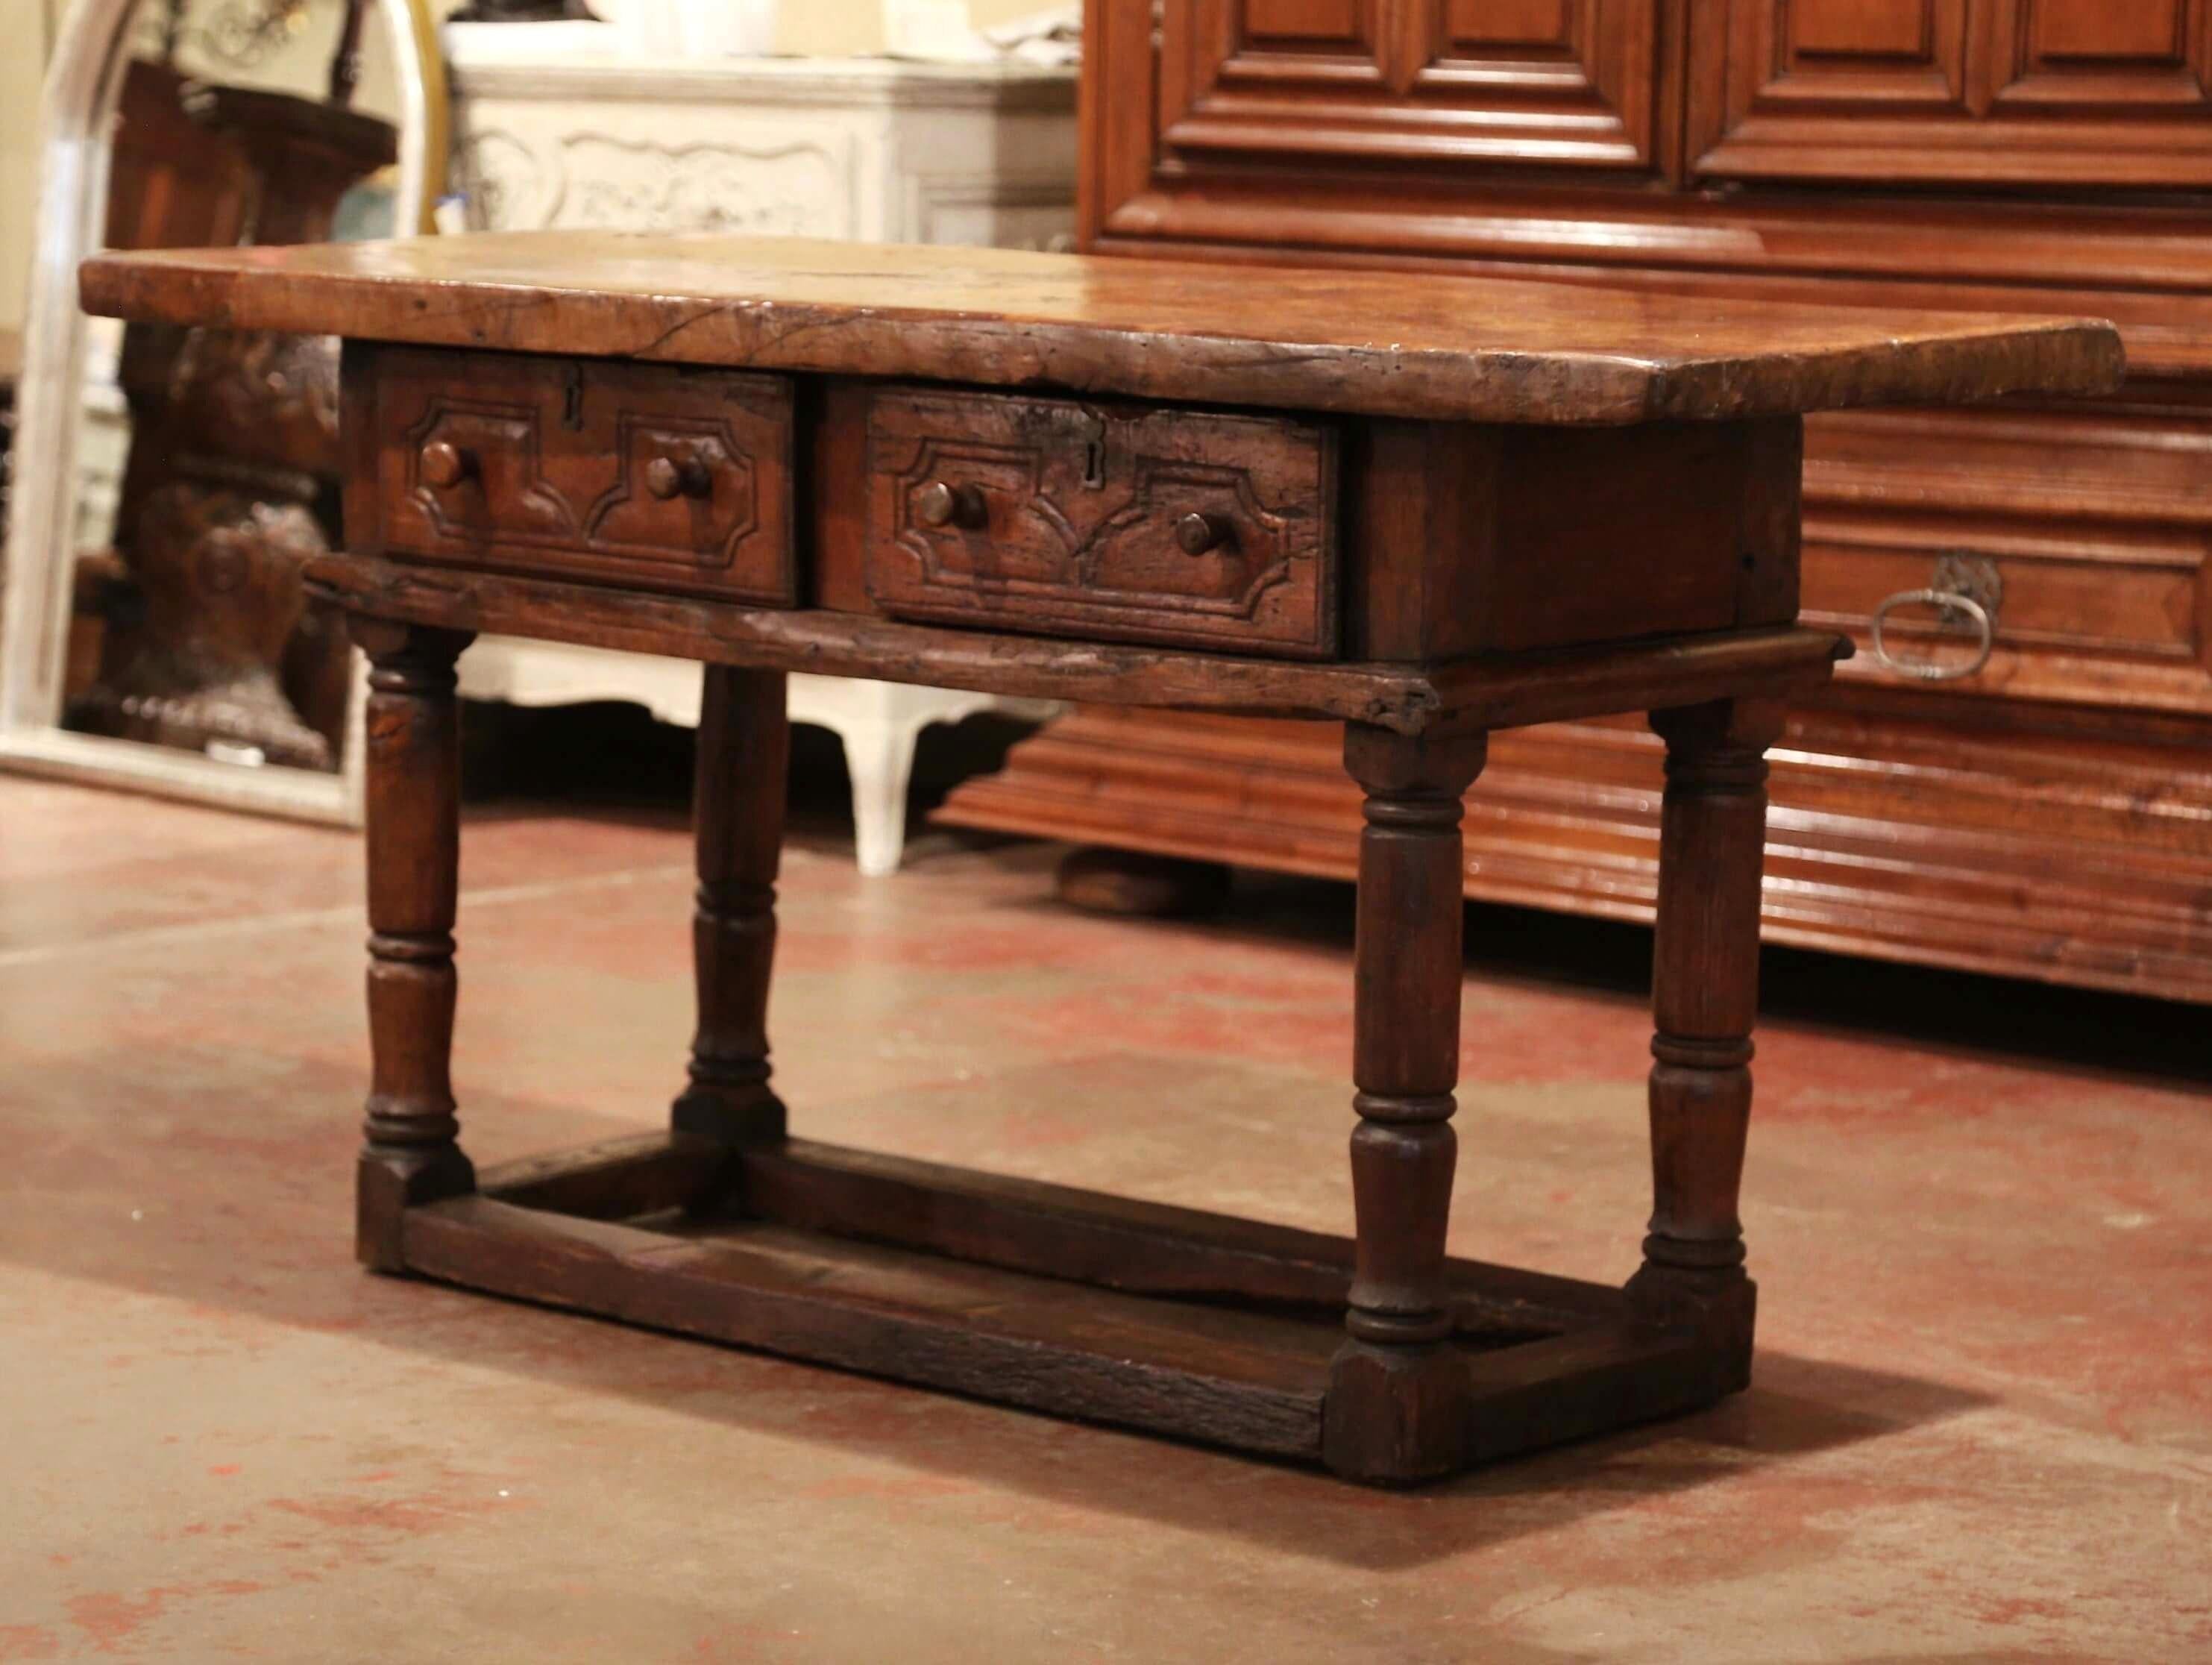 This elegant antique fruitwood console was crafted in Spain, circa 1760. The sofa table stands on four turned legs decorated with a rectangular stretcher at the base; it features a pair of drawers across the front with carved geometric decor and